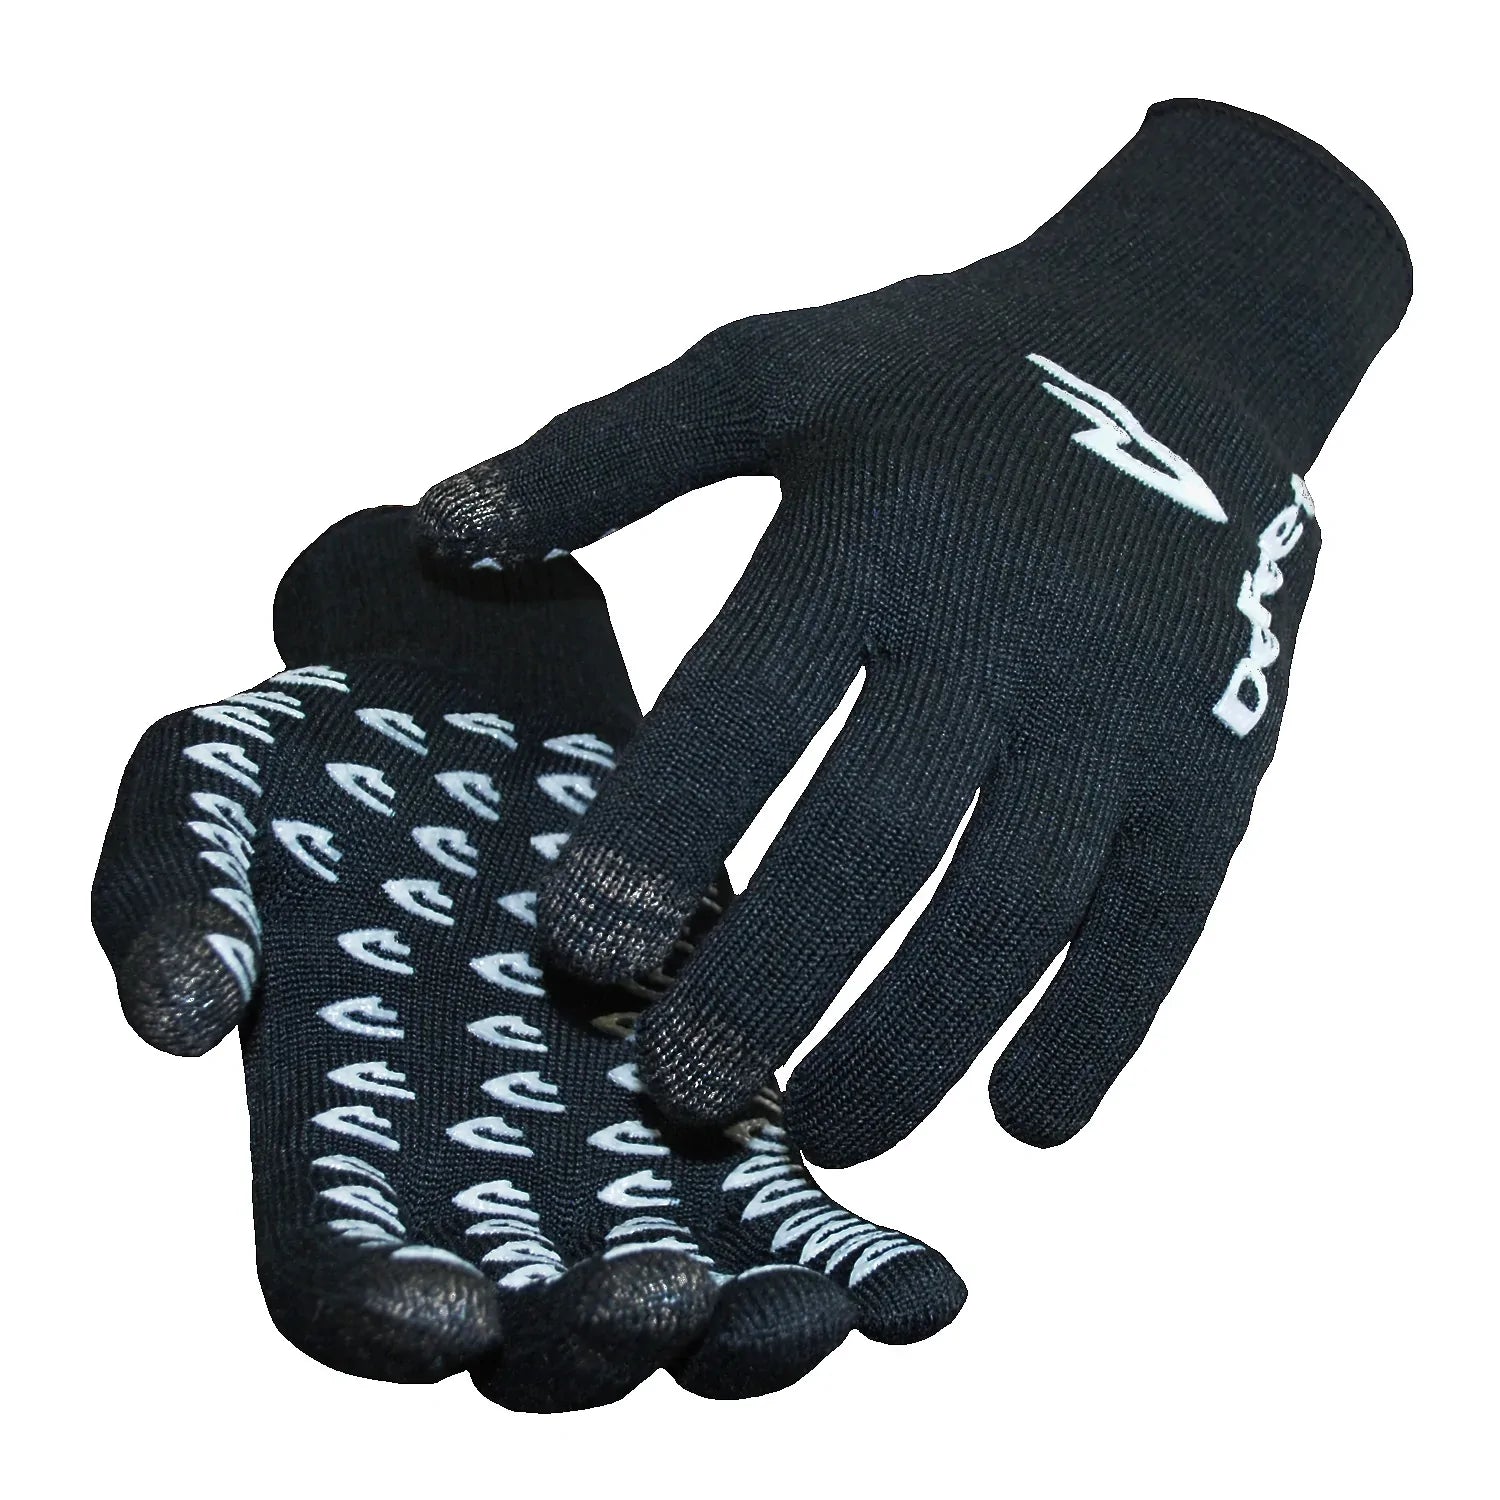 black knitted cycling gloves with white D-logo grippies on palm